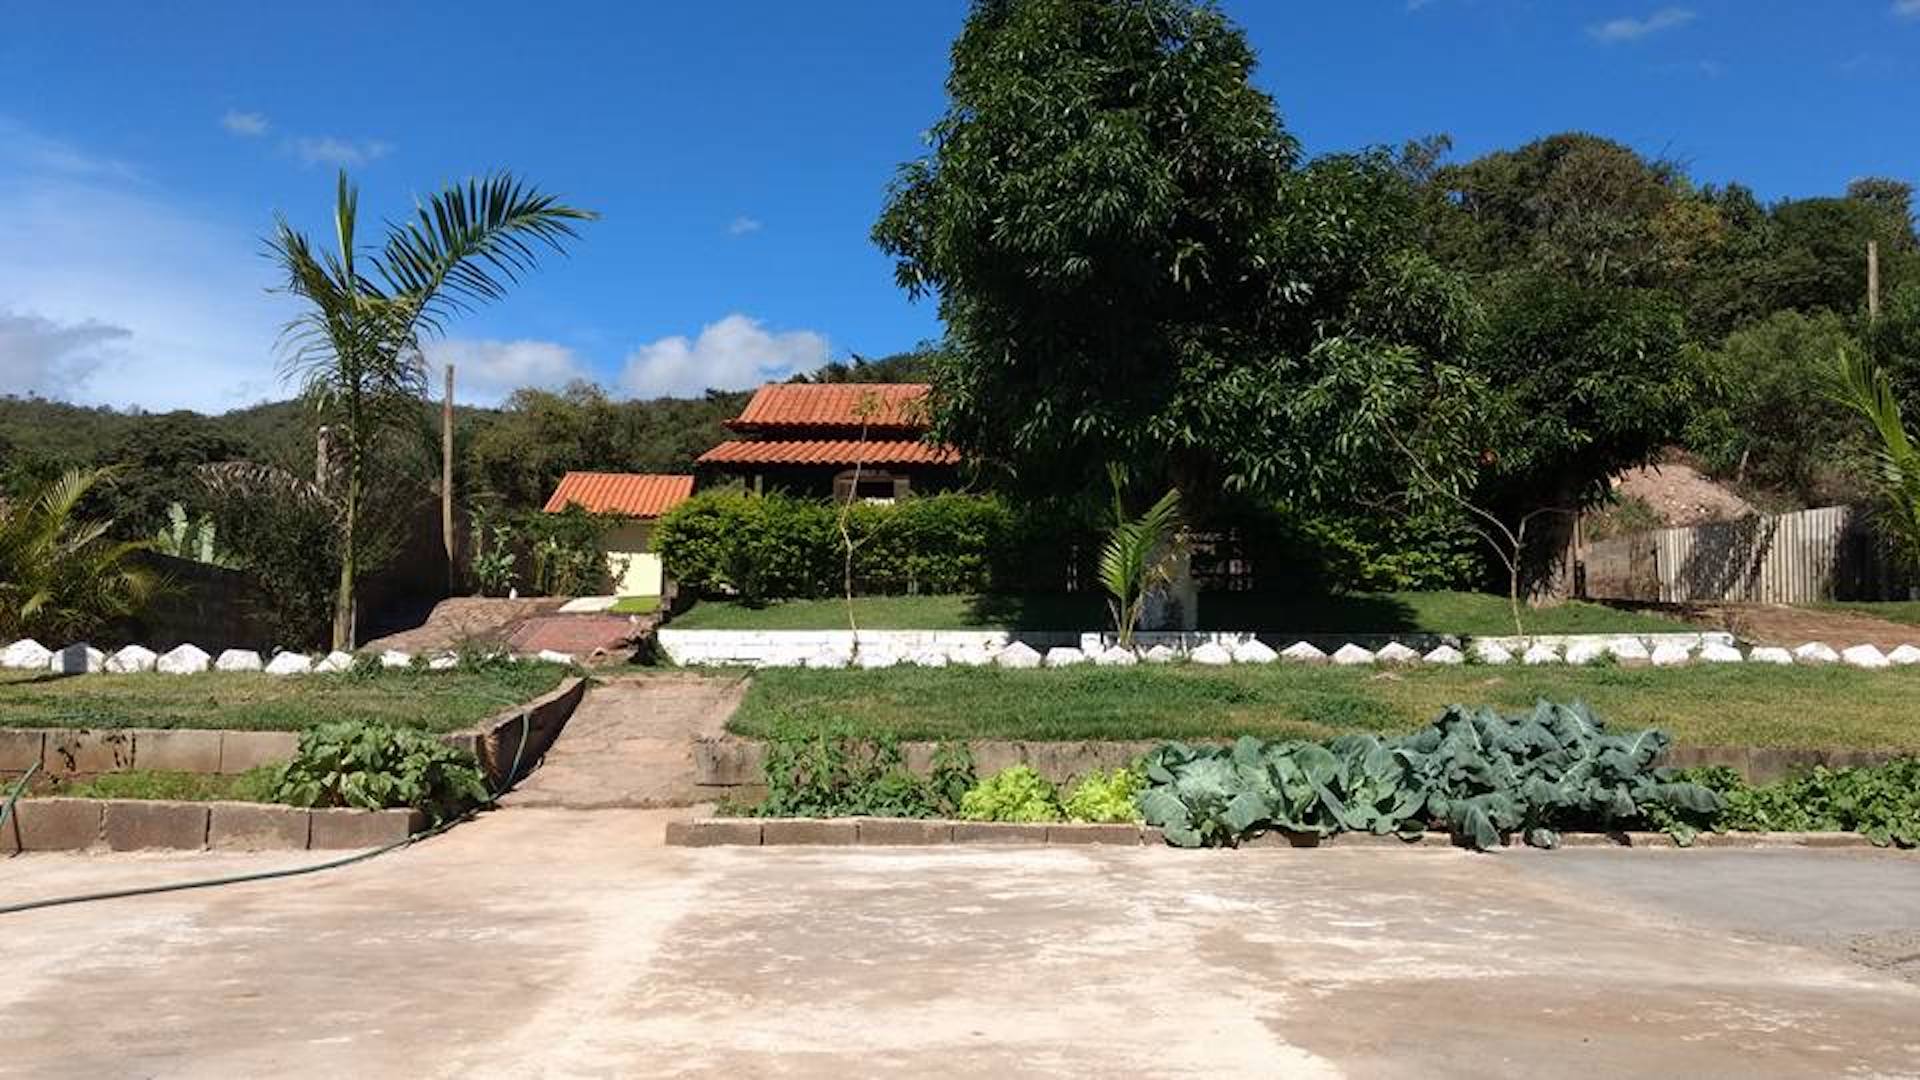 Minas Gerais, Brazil,Leleu's home is considered one of the 'prettiest' in the neighborhood of Socorro and is in the direct path of the mud if the dam breaks